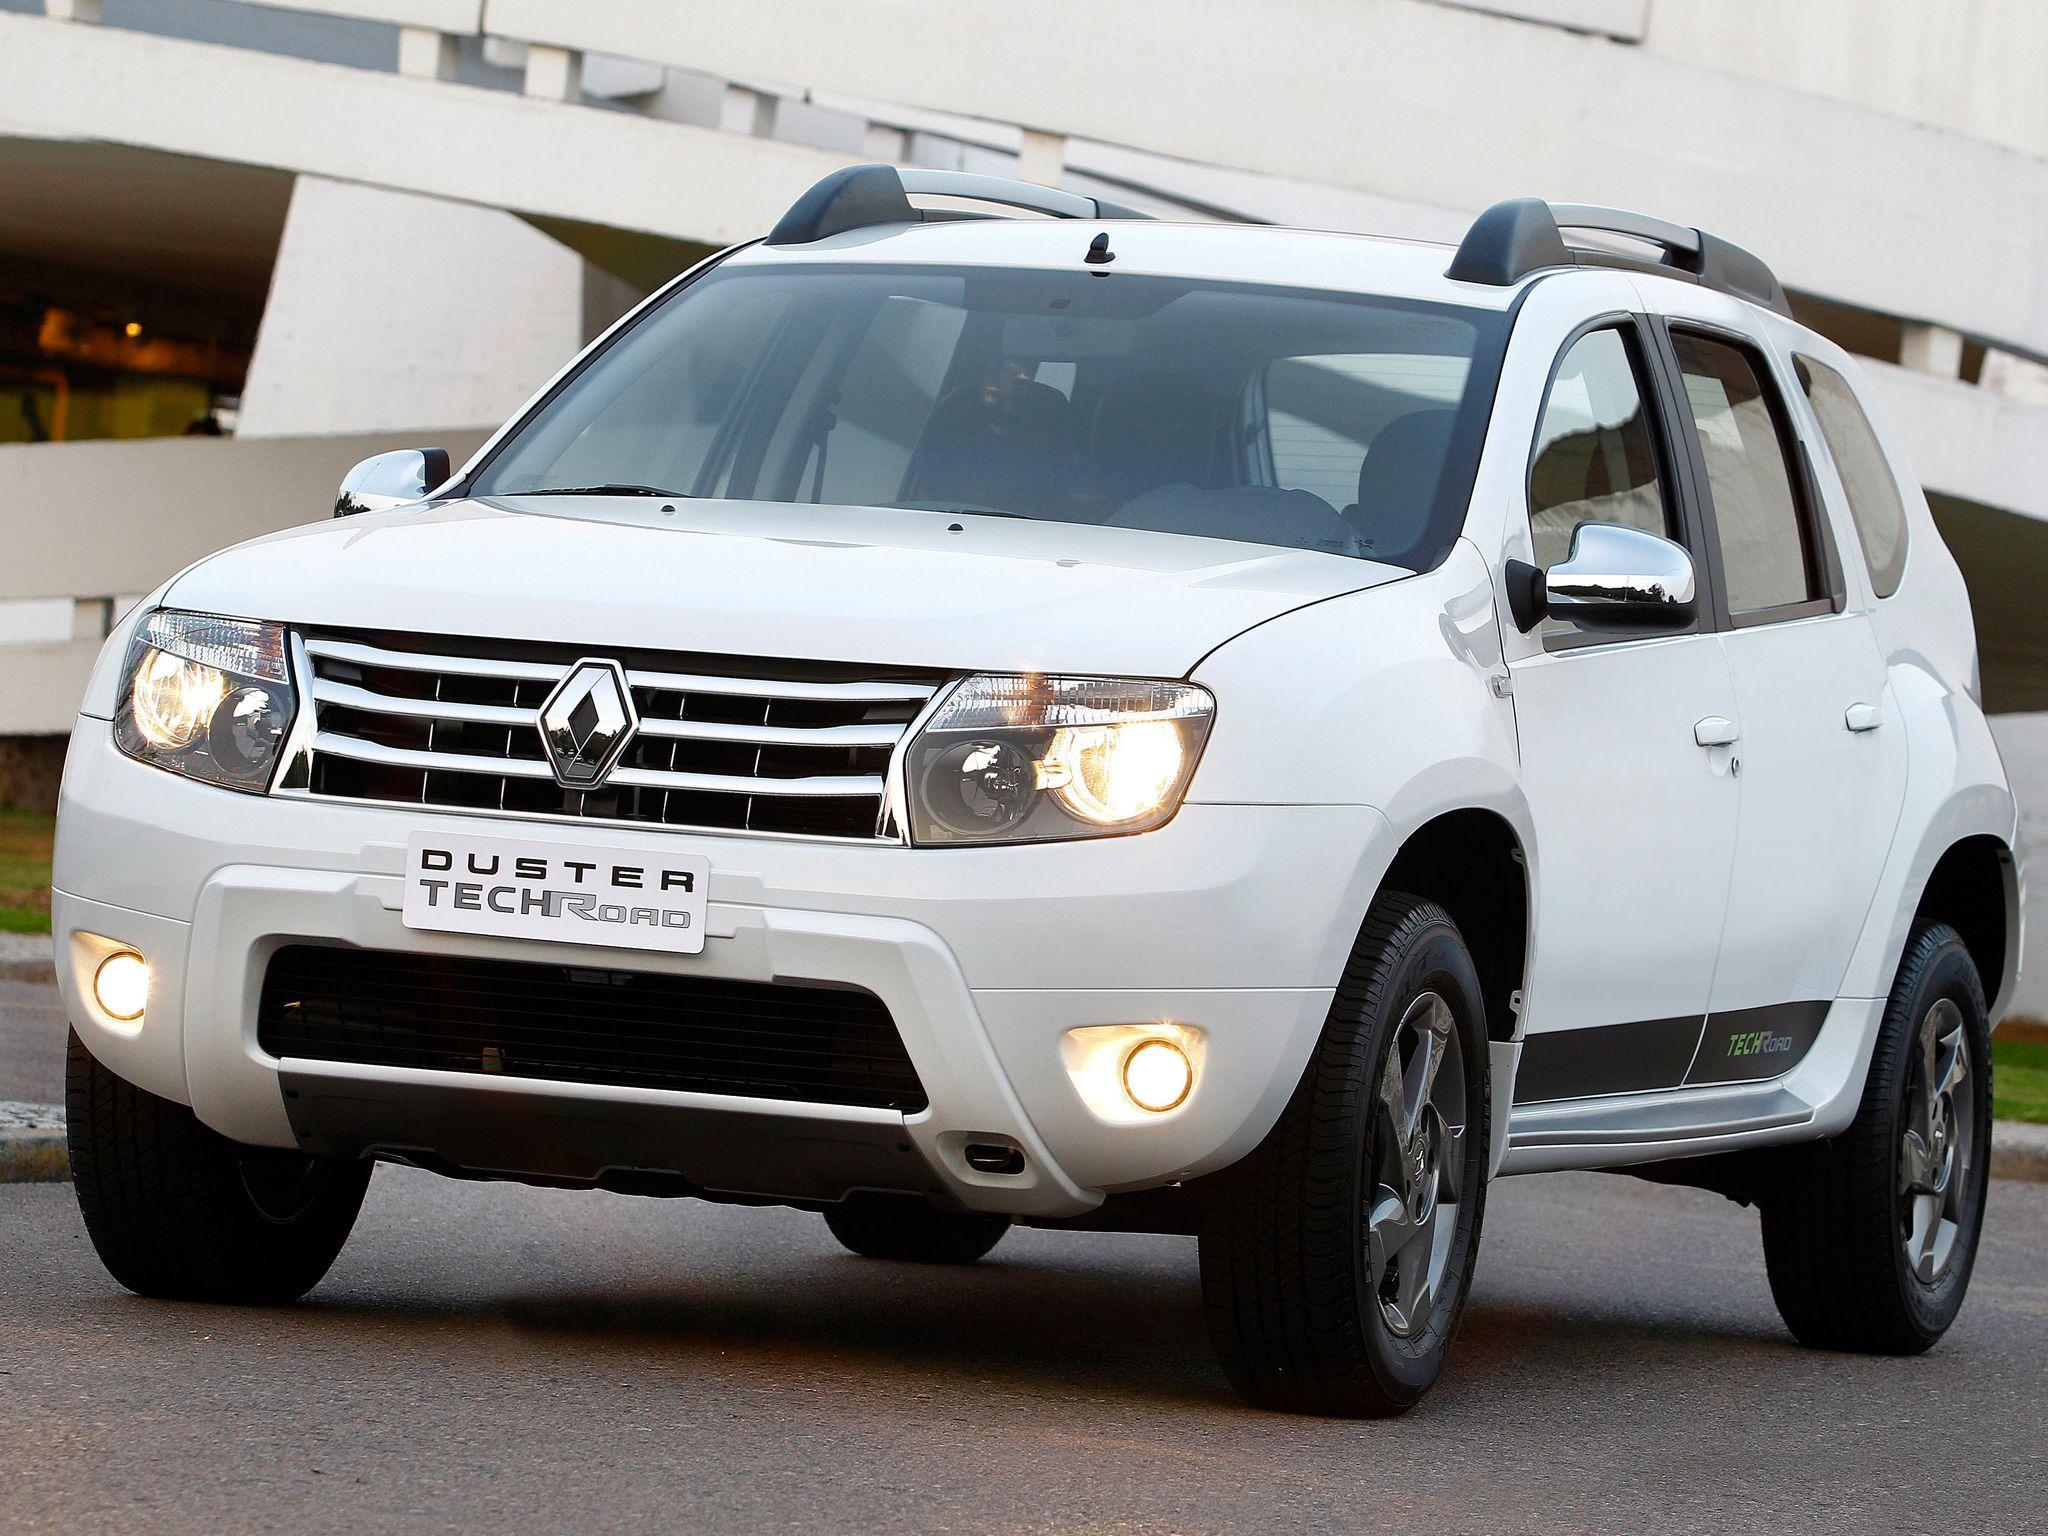 Renault Duster picture # 95782. Renault photo gallery